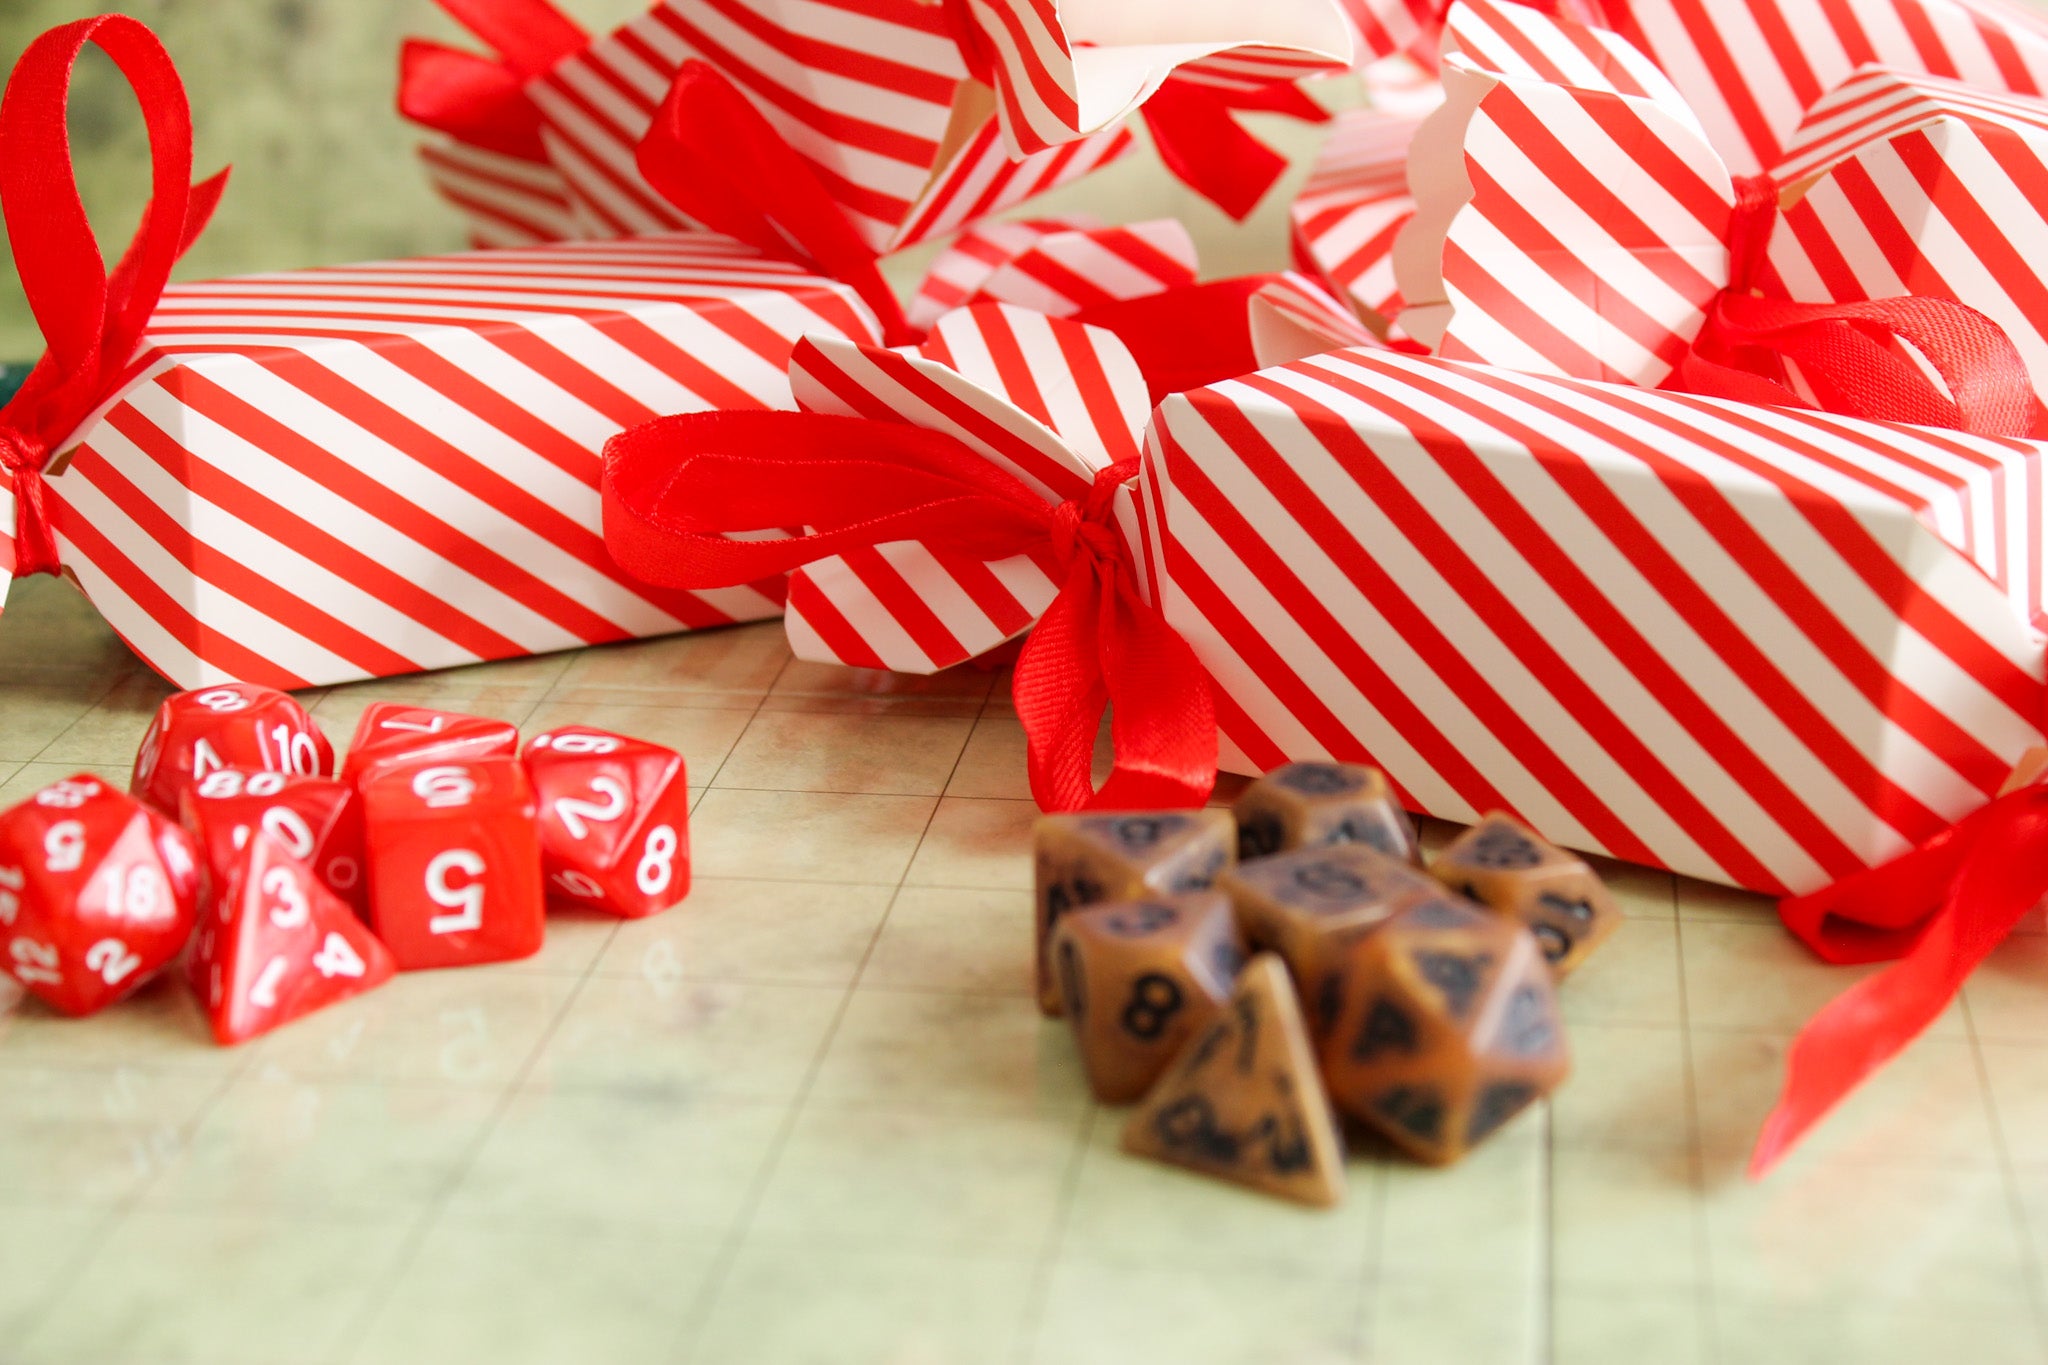 DnD Luxury Christmas Crackers with full set of dice - Mystery Dice Goblin